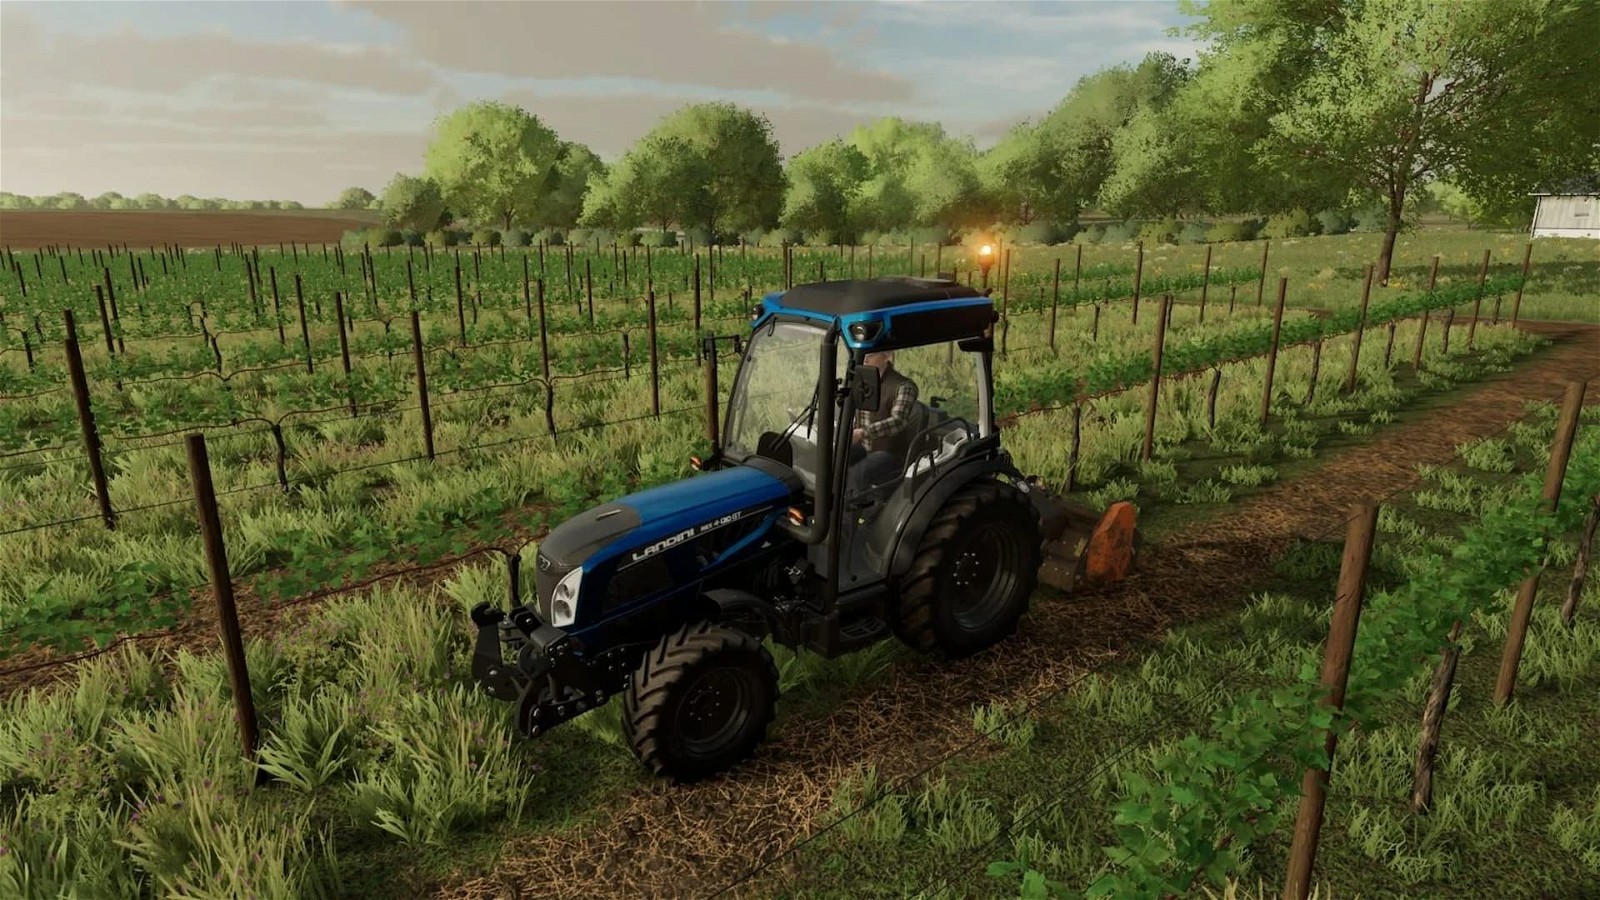 Farming Simulator 22 is also said to be included in the October 2023 lineup